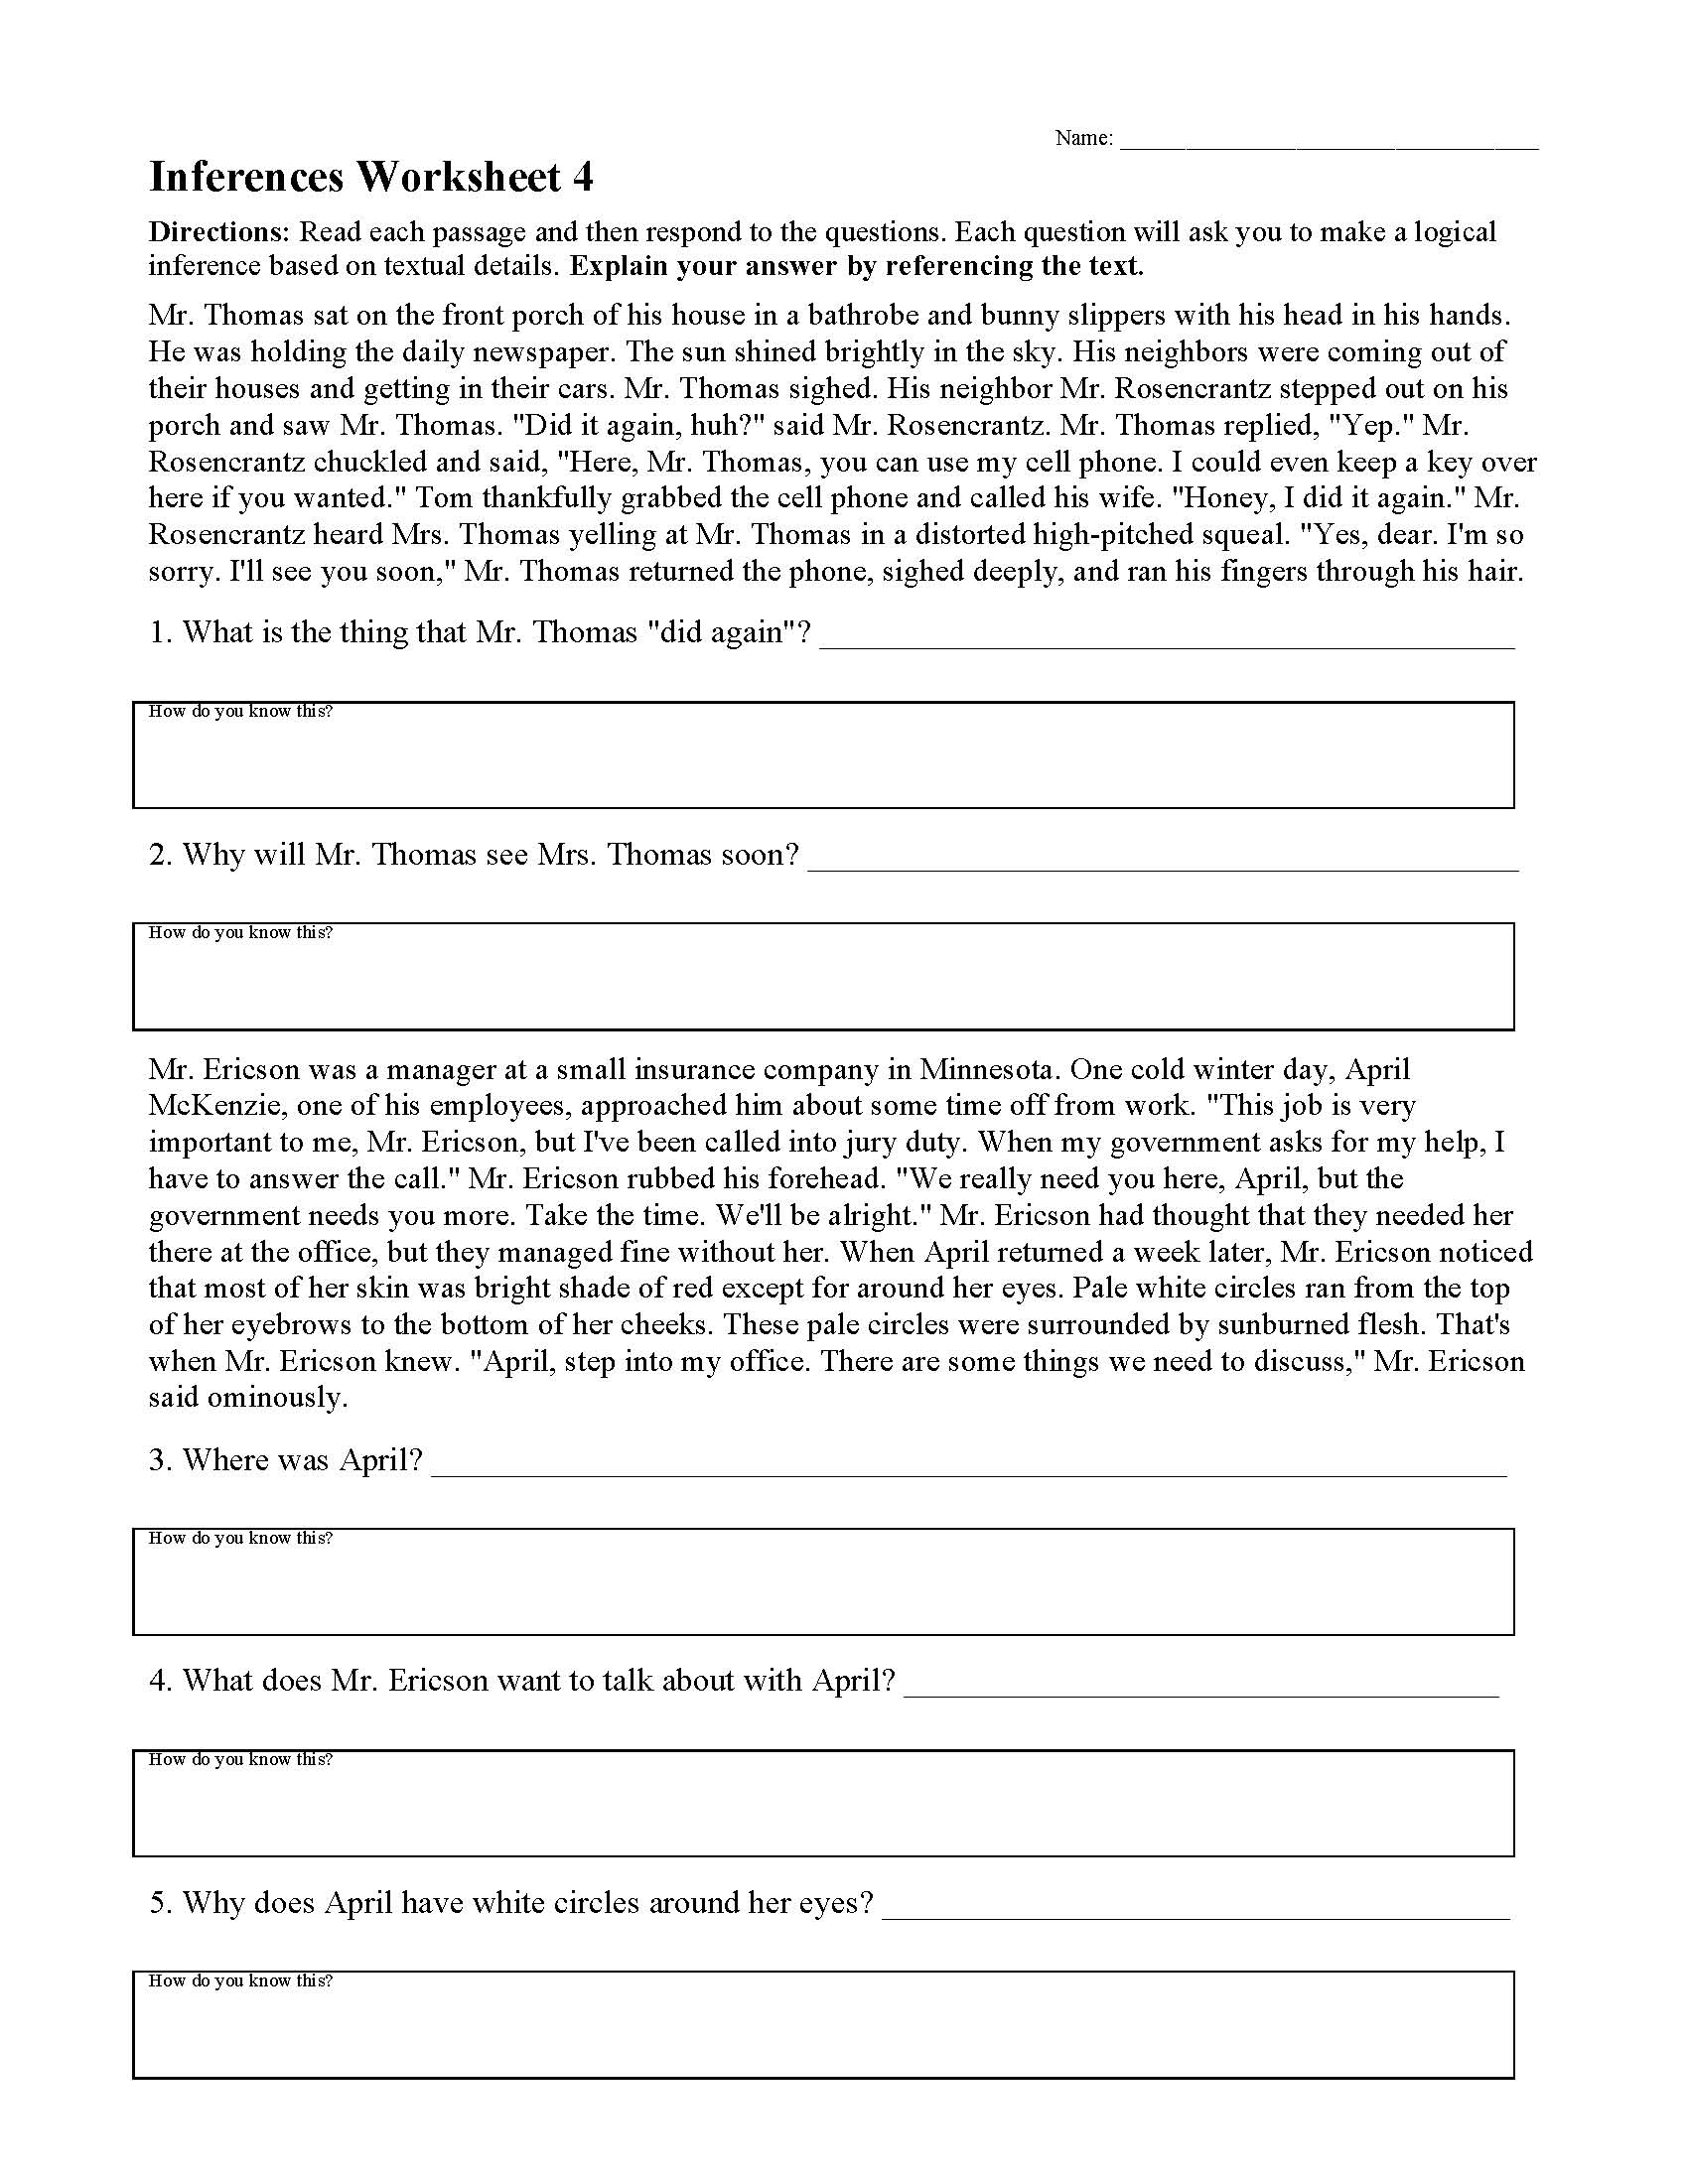 inferences-worksheet-4-reading-activity